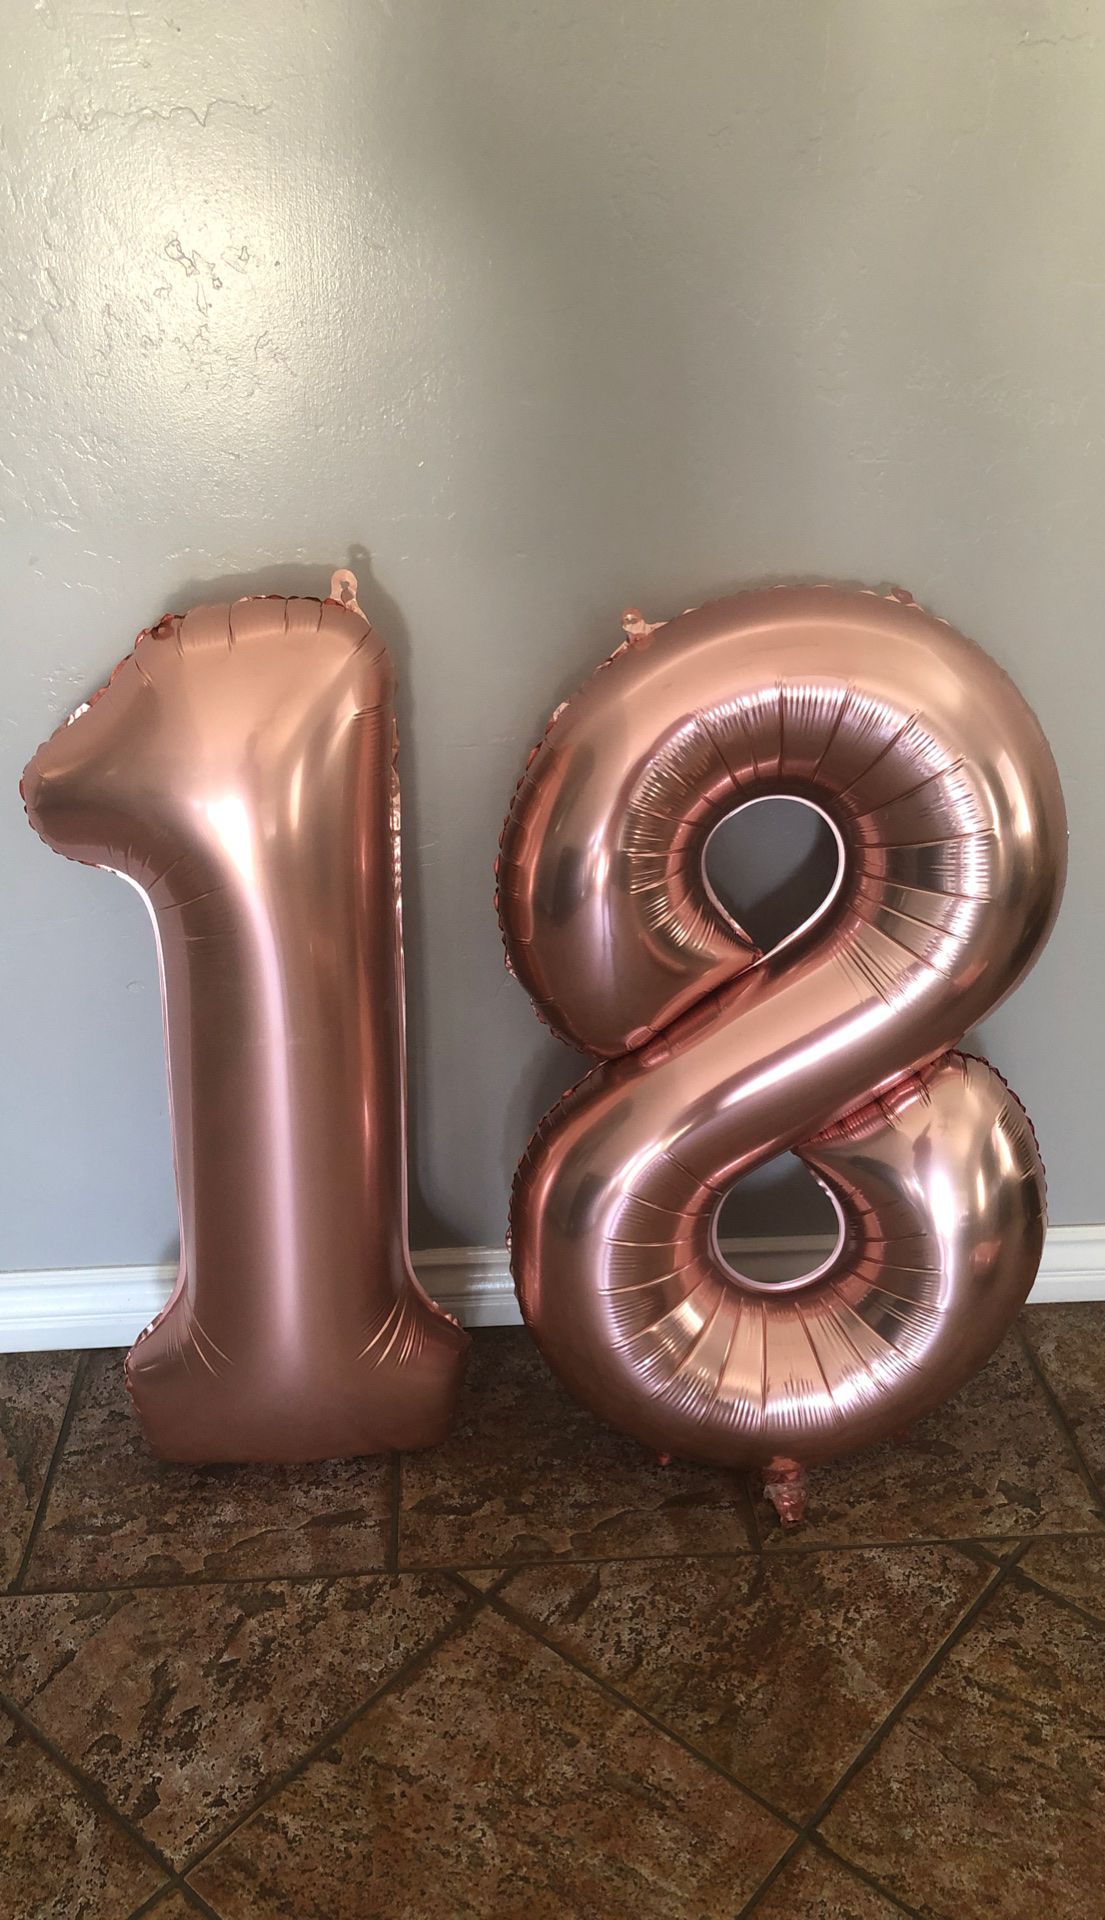 18 number balloons